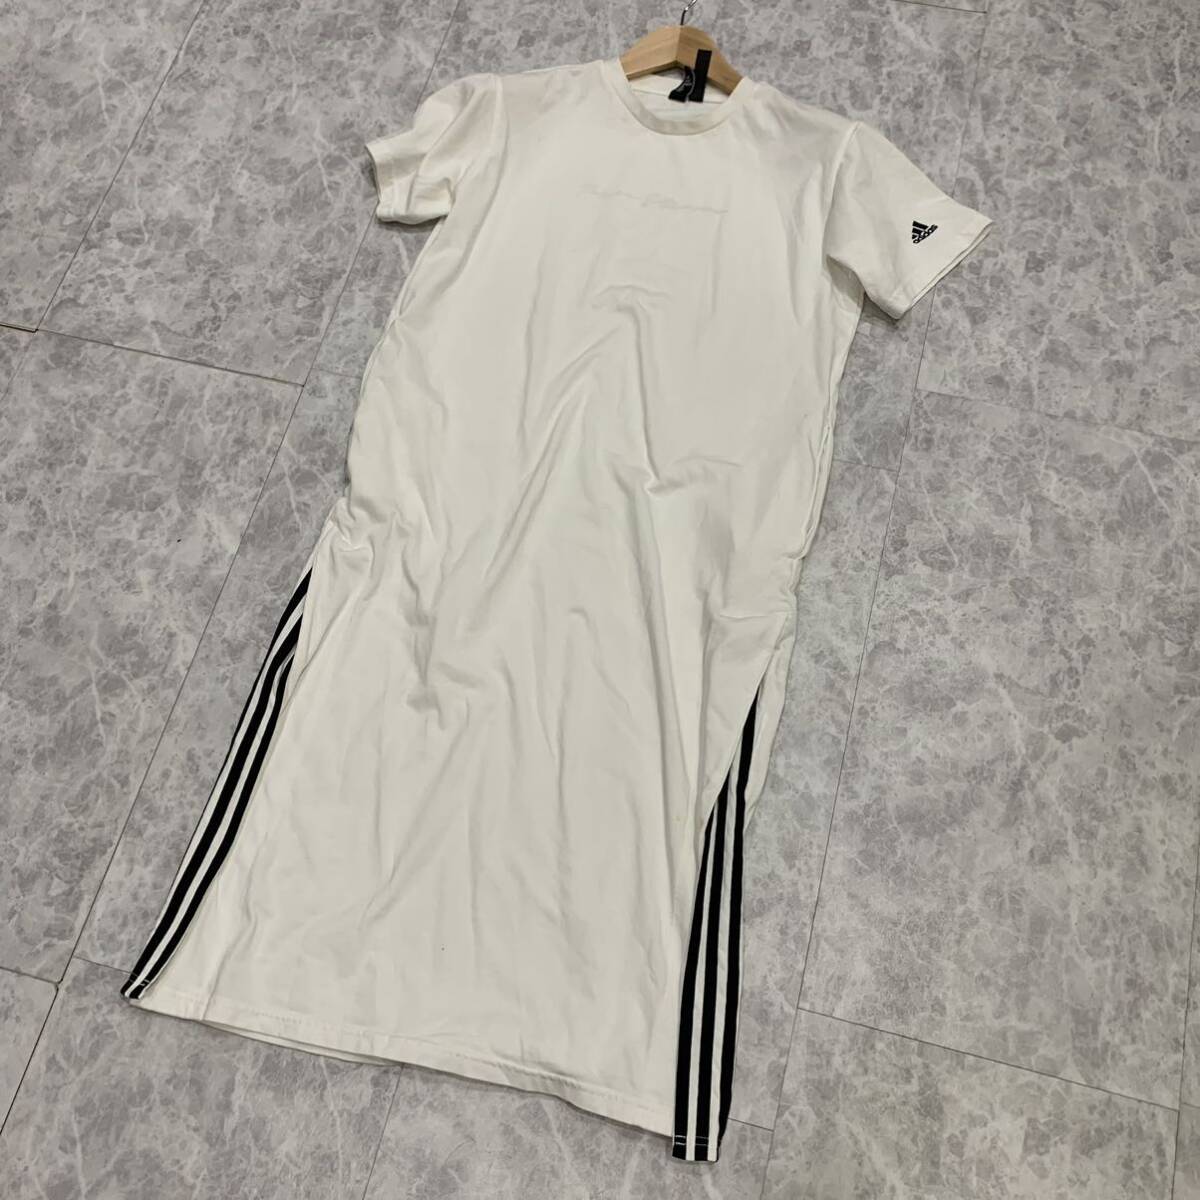 Y V refined design!! \' comfortable eminent \' adidas Adidas stretch side line long short sleeves shirt One-piece size:M lady's 